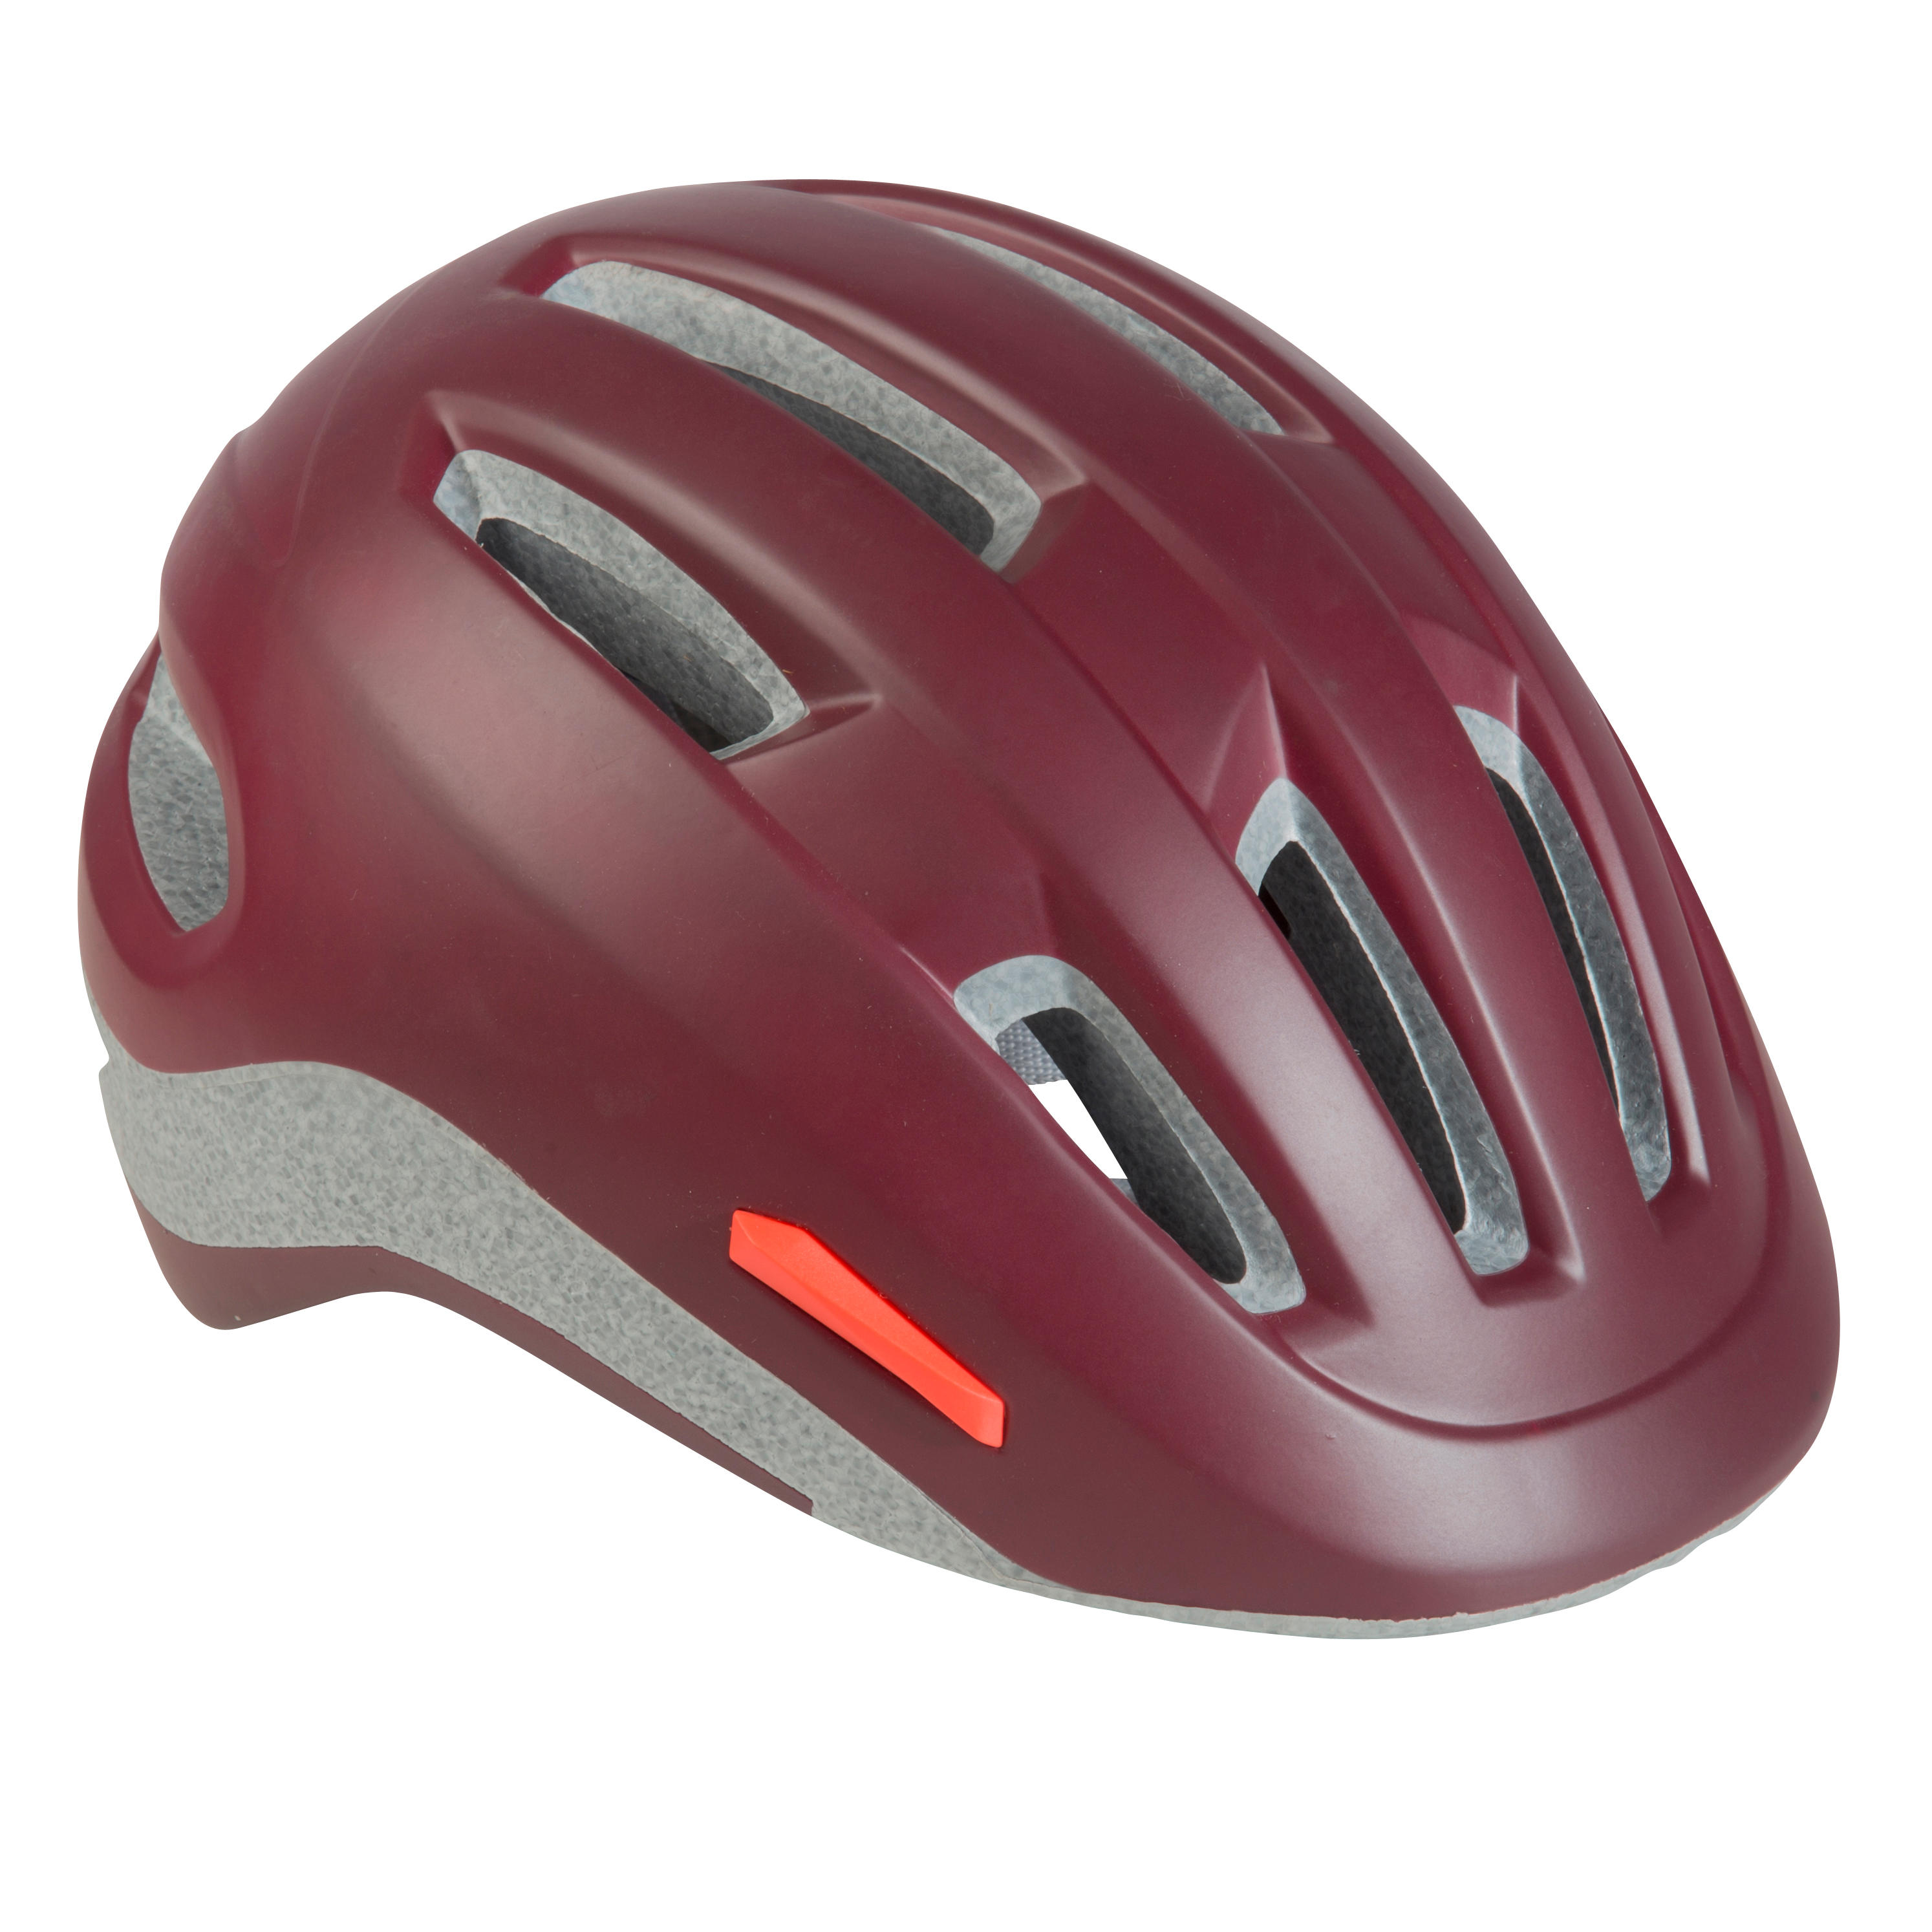 BTWIN 500 City Cycling Helmet - Red